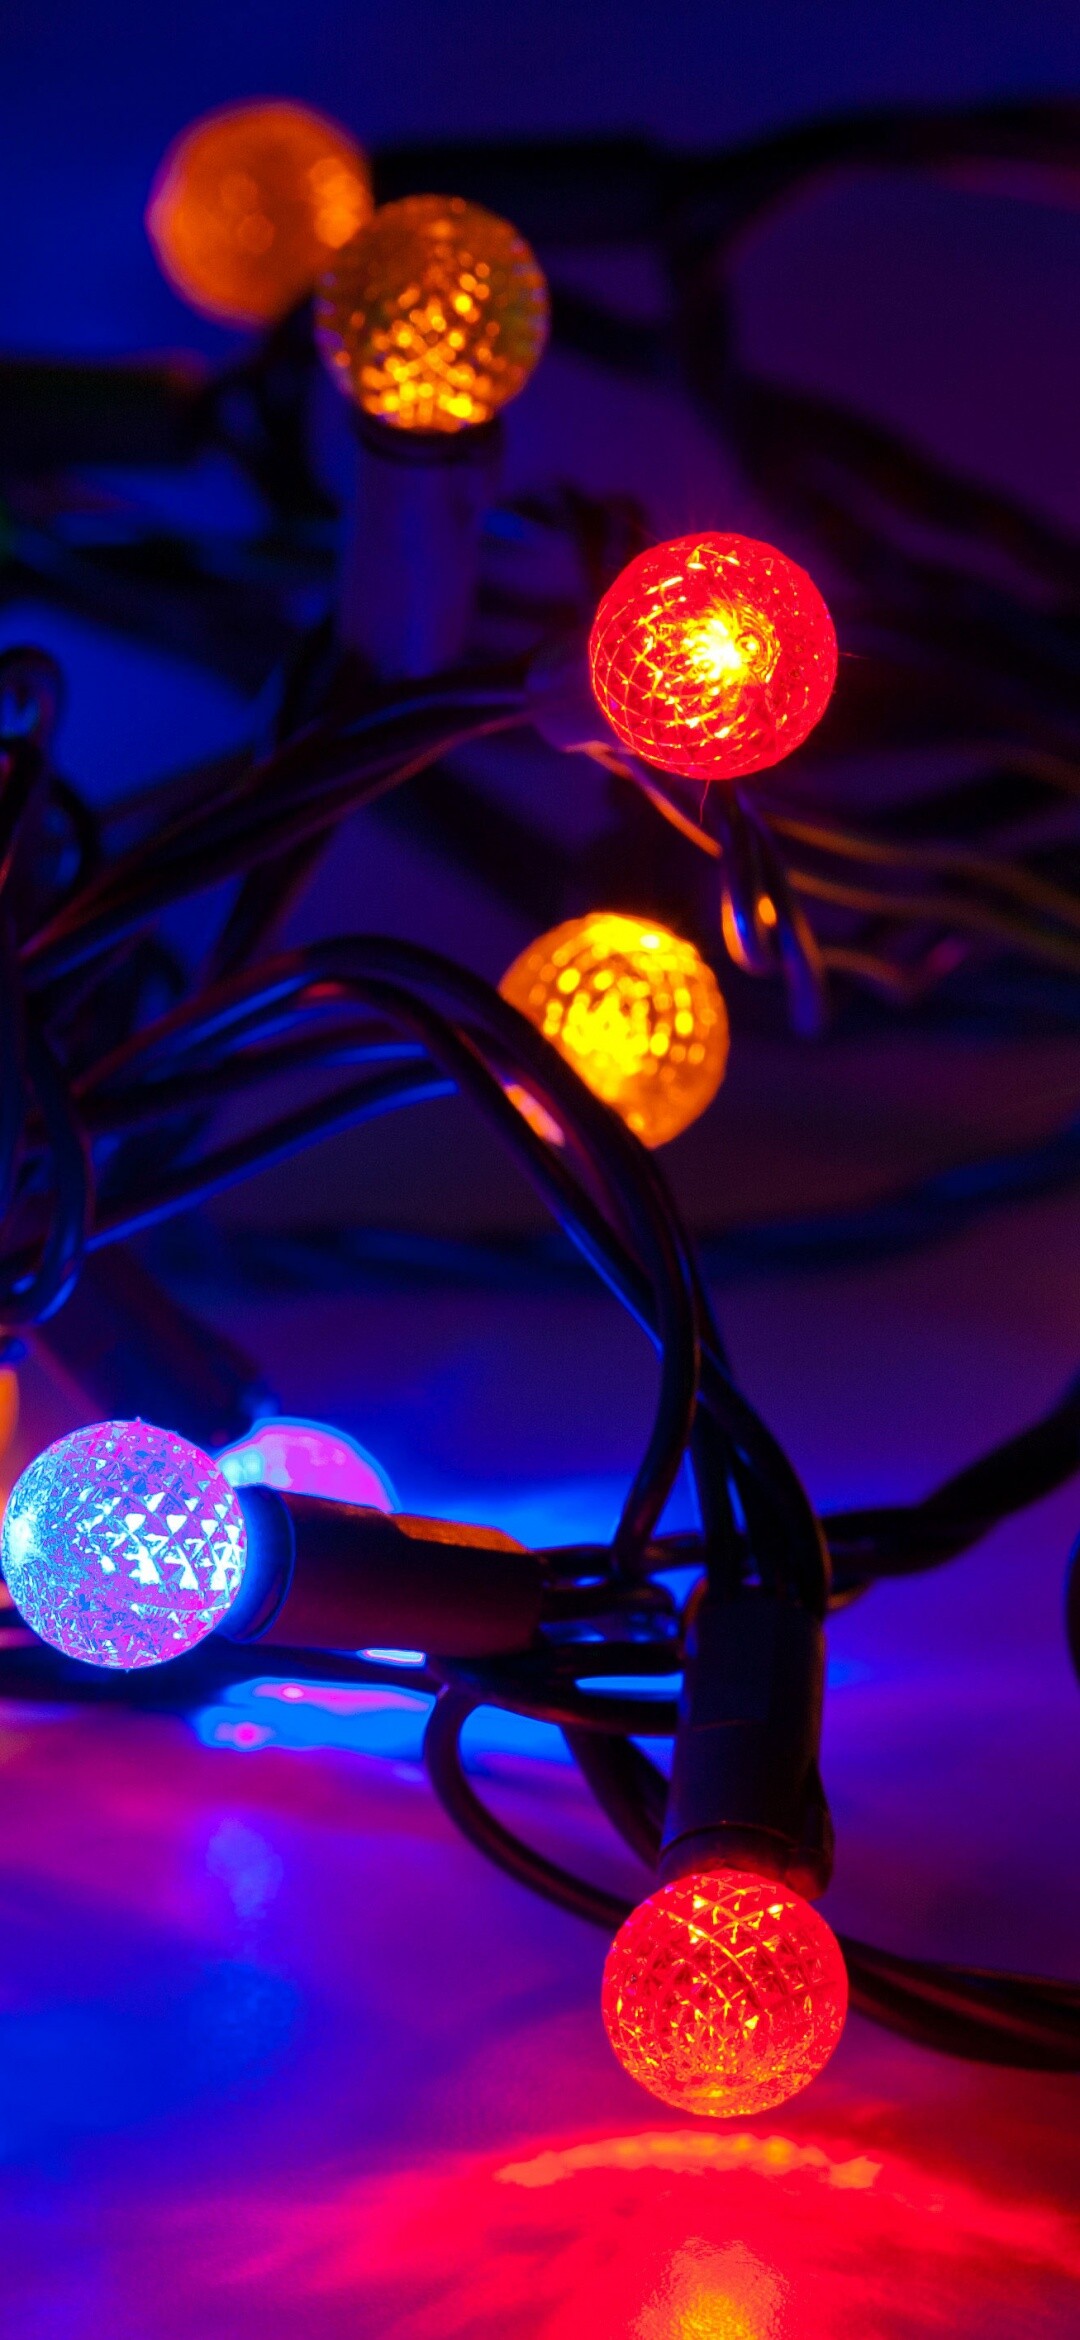 Christmas Lights: Colorful bulbs, Celebrations, Ornament, Decorations. 1080x2340 HD Background.